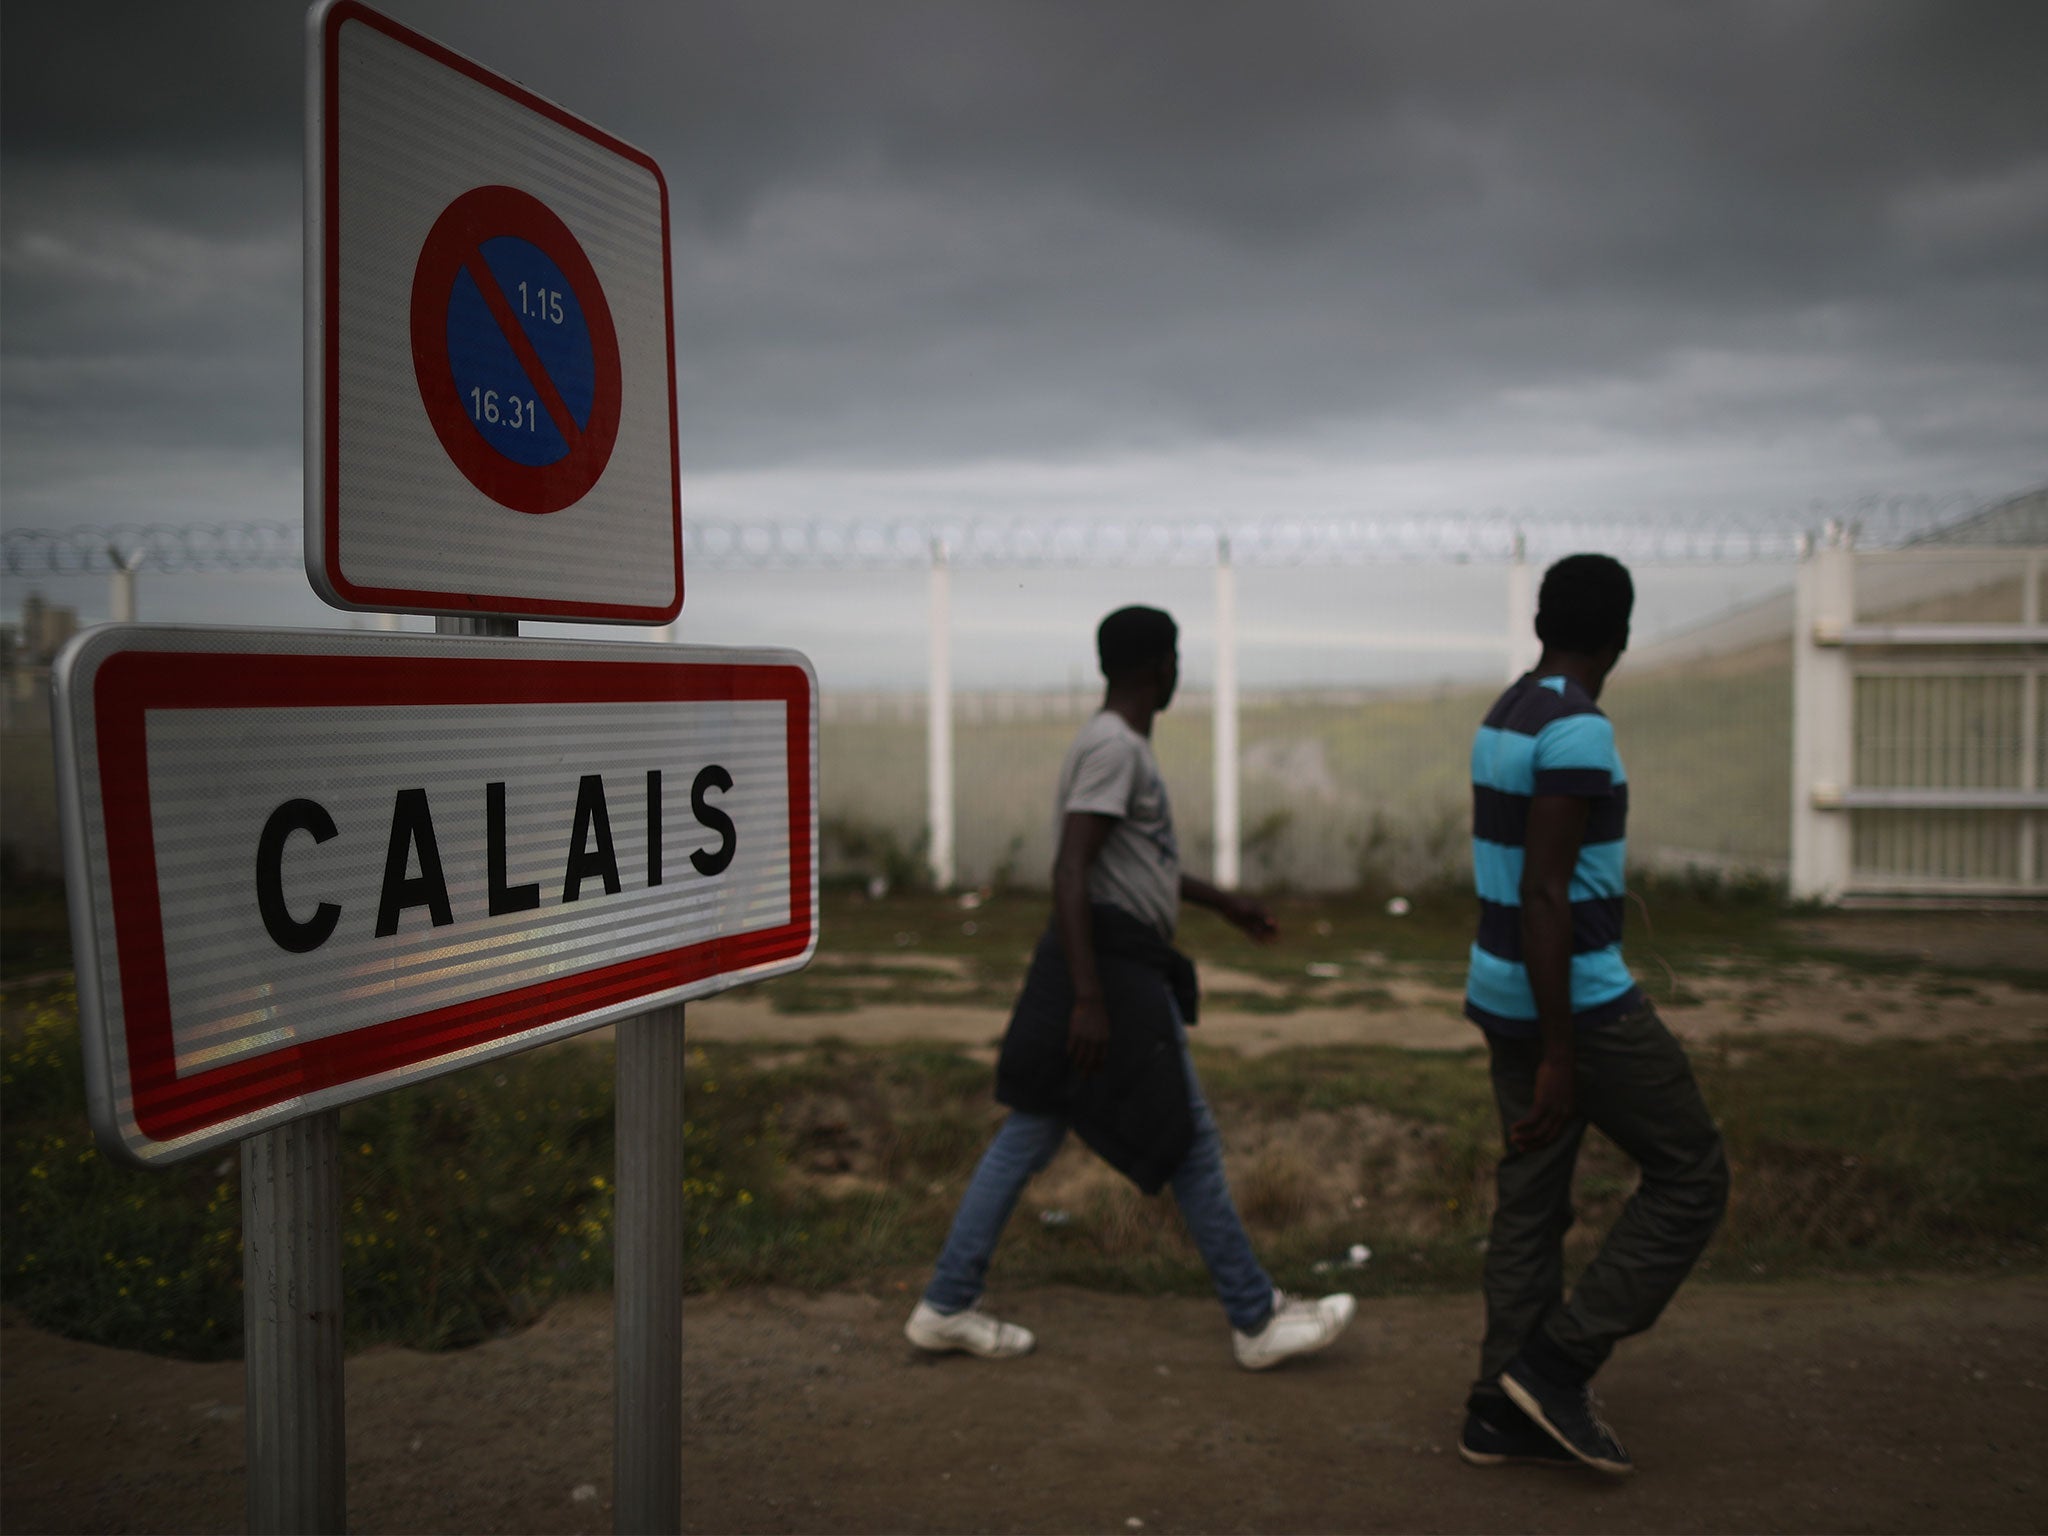 The founder of Care4Calais says any sexual relationship between a volunteer and a refugee is strongly discouraged ue to 'emotional vulnerability' of refugees